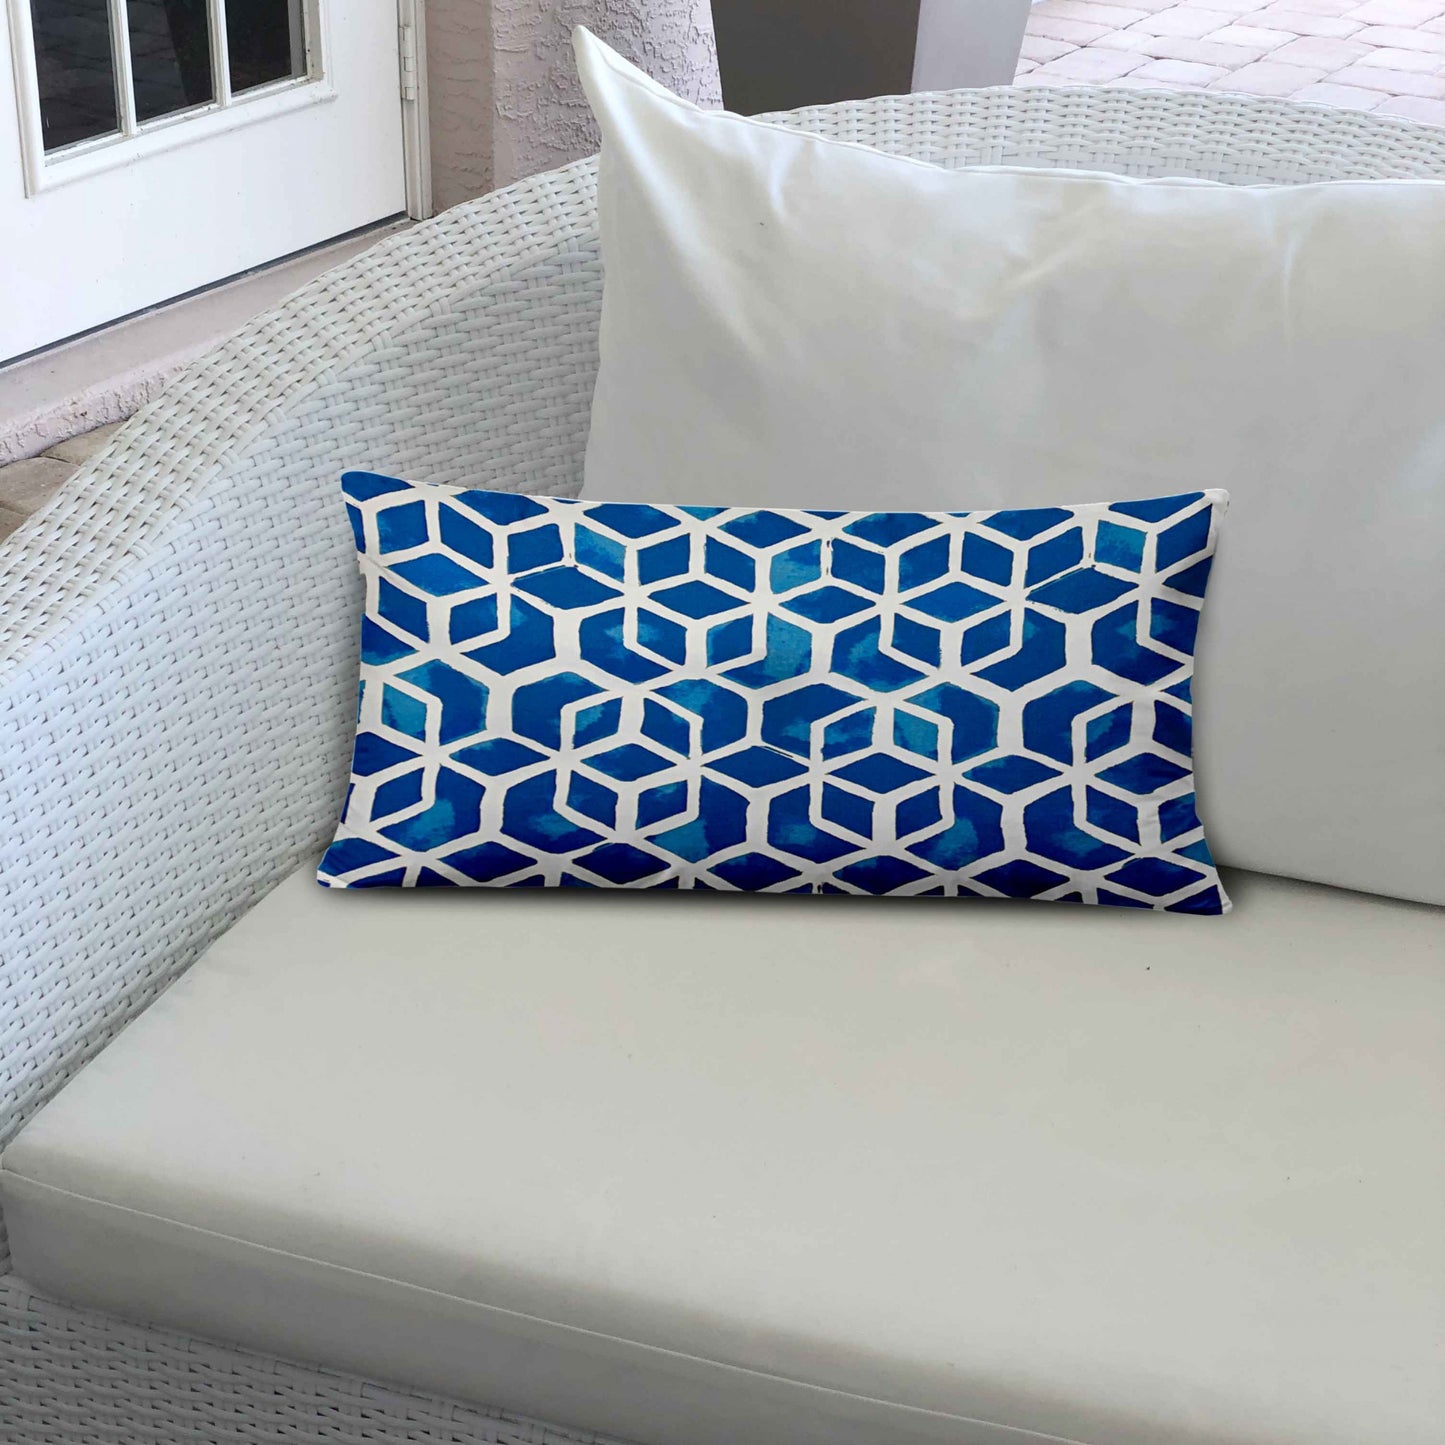 16" X 26" Blue And White Zippered Geometric Lumbar Indoor Outdoor Pillow Cover